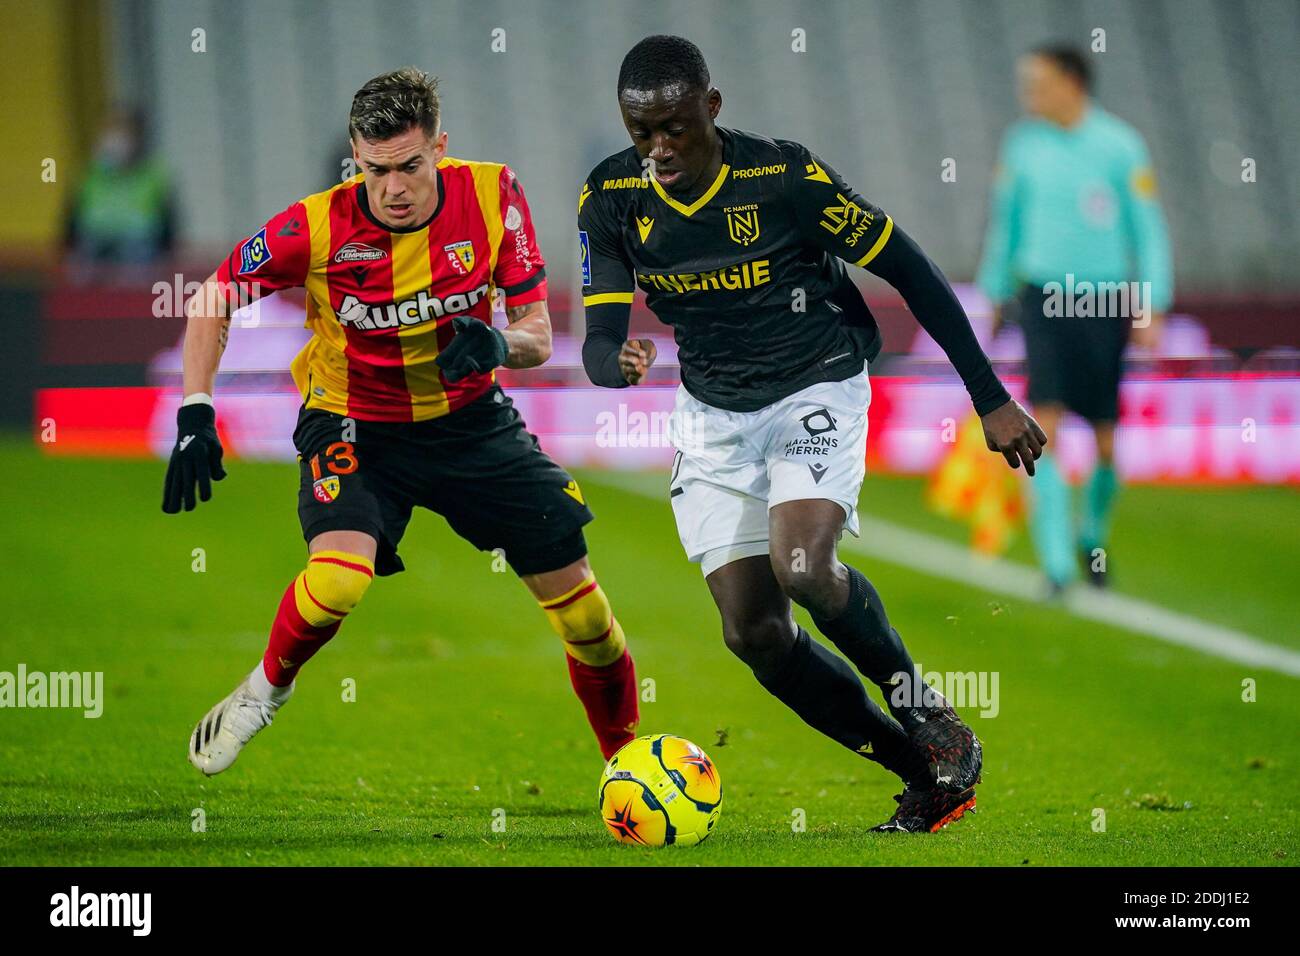 LENS, FRANCE - NOVEMBER 25: Clément Michelin of Lens, Dennis Appiah of  Nantes during the Ligue 1 match between RC Lens and FC Nantes at Stade  Bollaert-Delelis on november 25, 2020 in